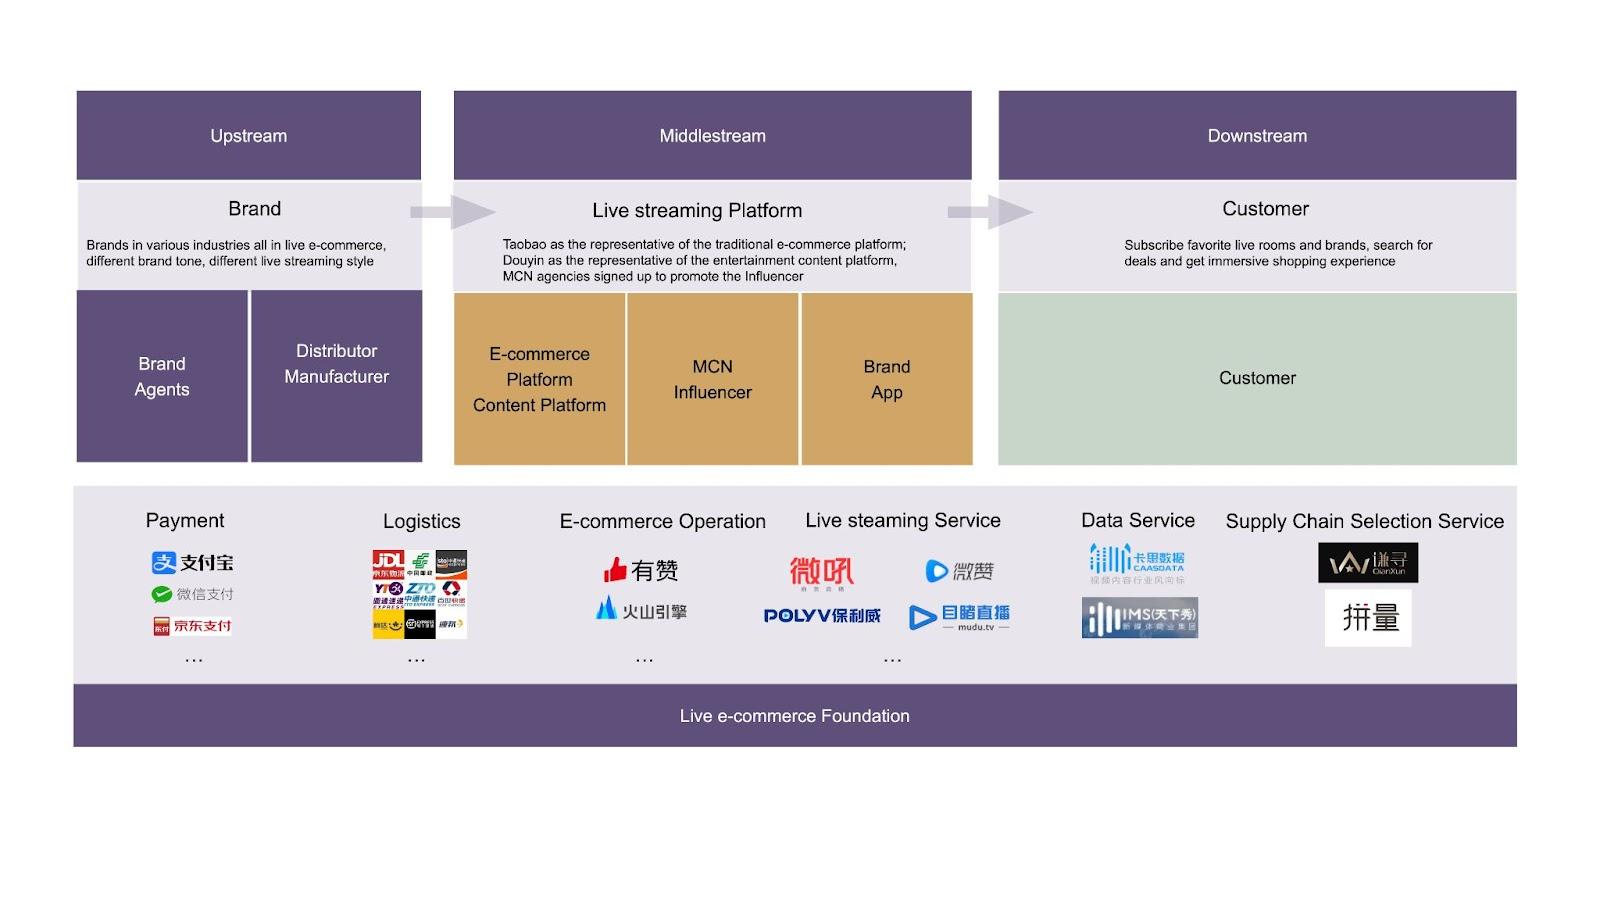 Overview of the live e-commerce industry chain